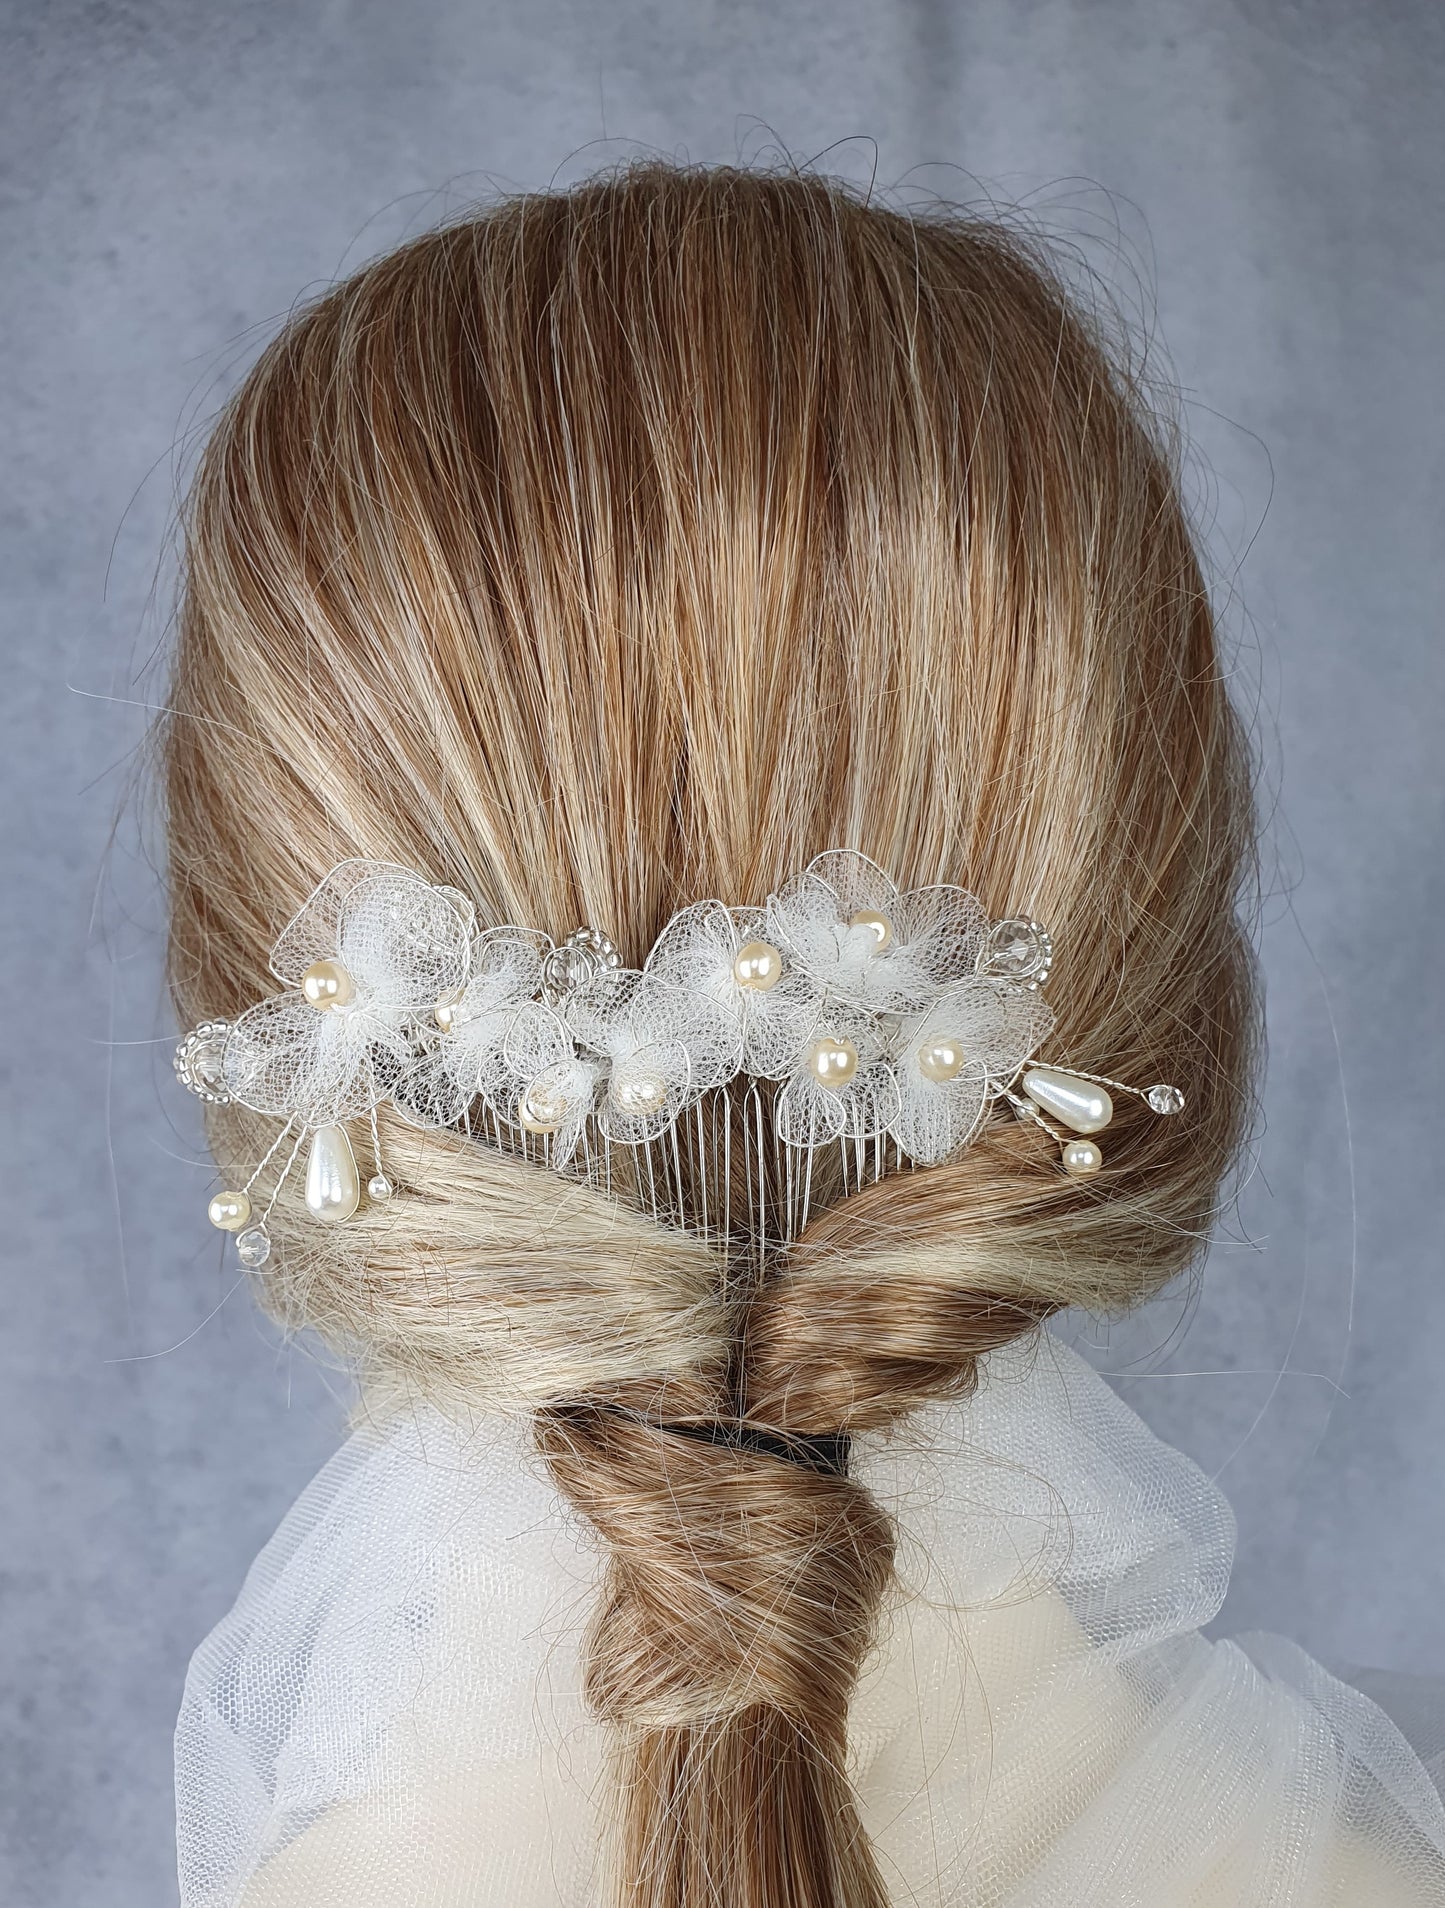 Handmade bridal comb with pearls, drop stones and tulle flowers - hair accessory for weddings with silver-colored metal comb